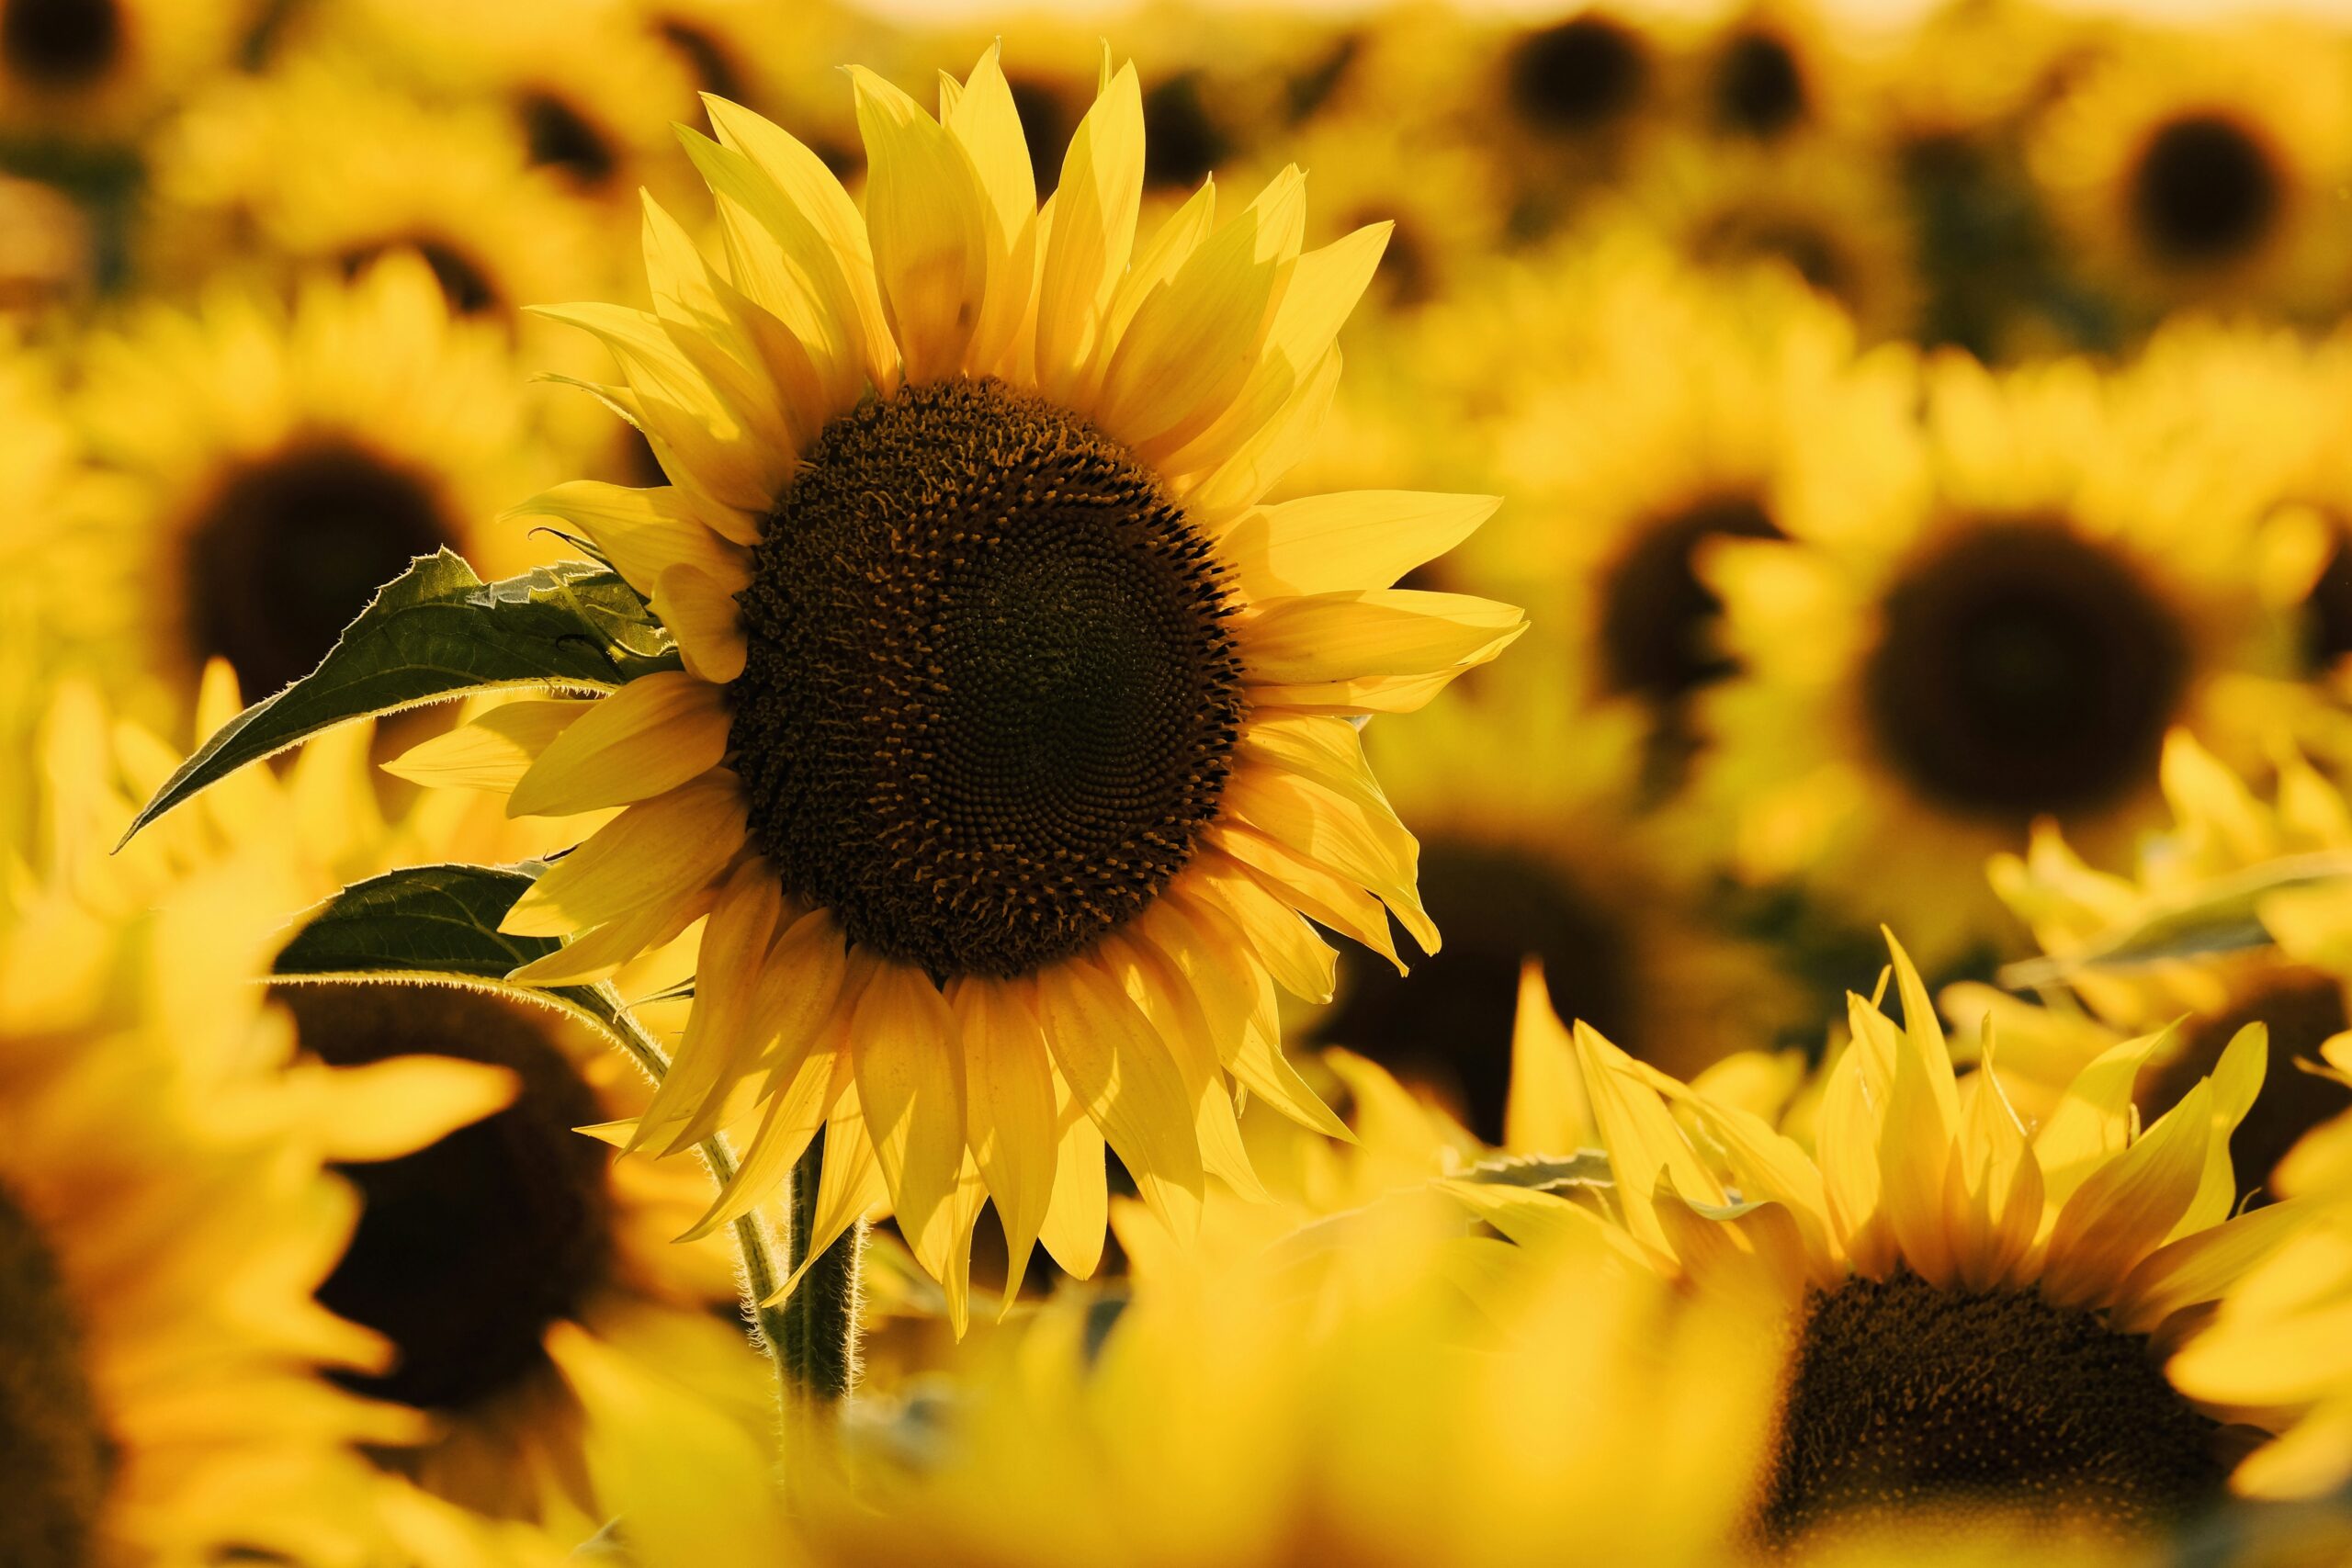 The Beauty and Symbolism of Sunflowers